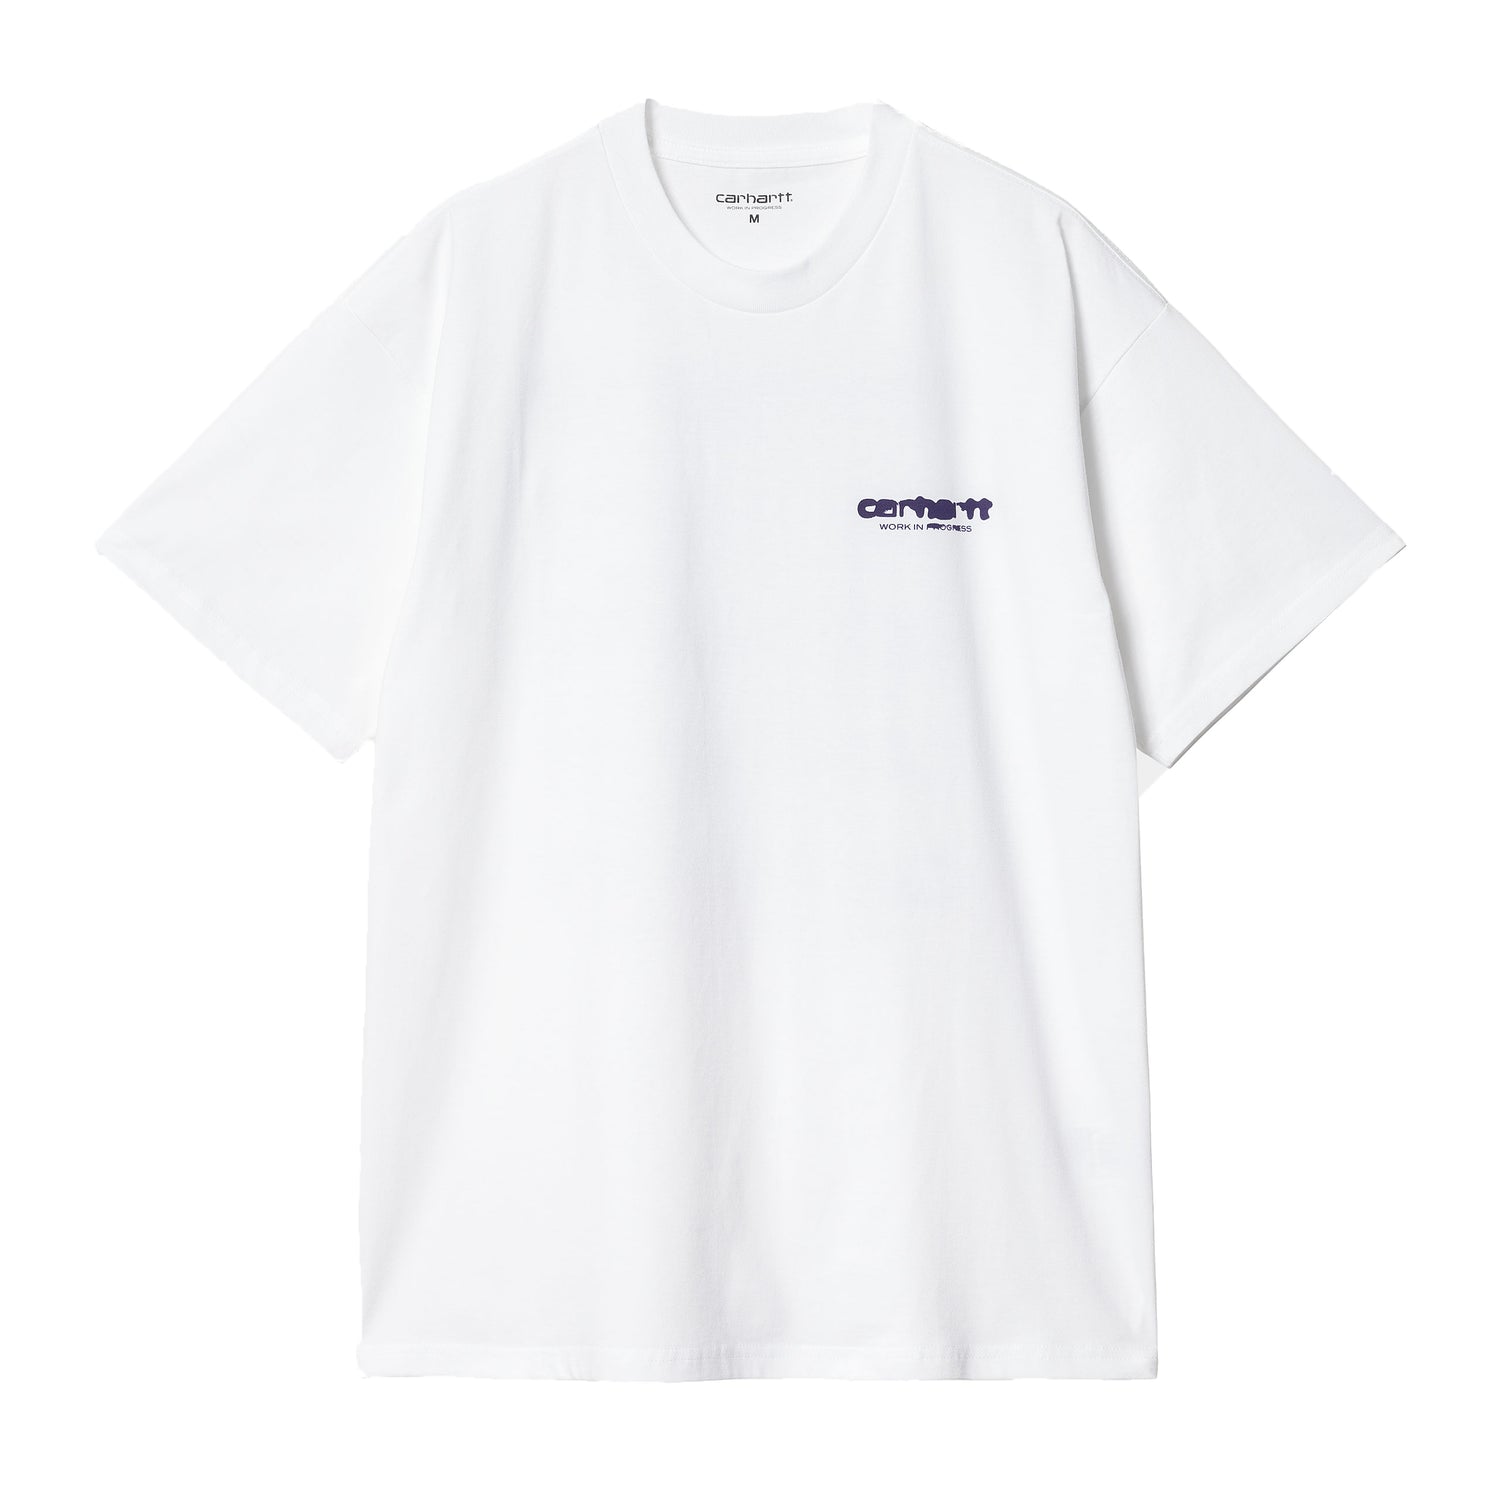 S/S INK BLEED T-SHIRT WHITE / TYRIAN